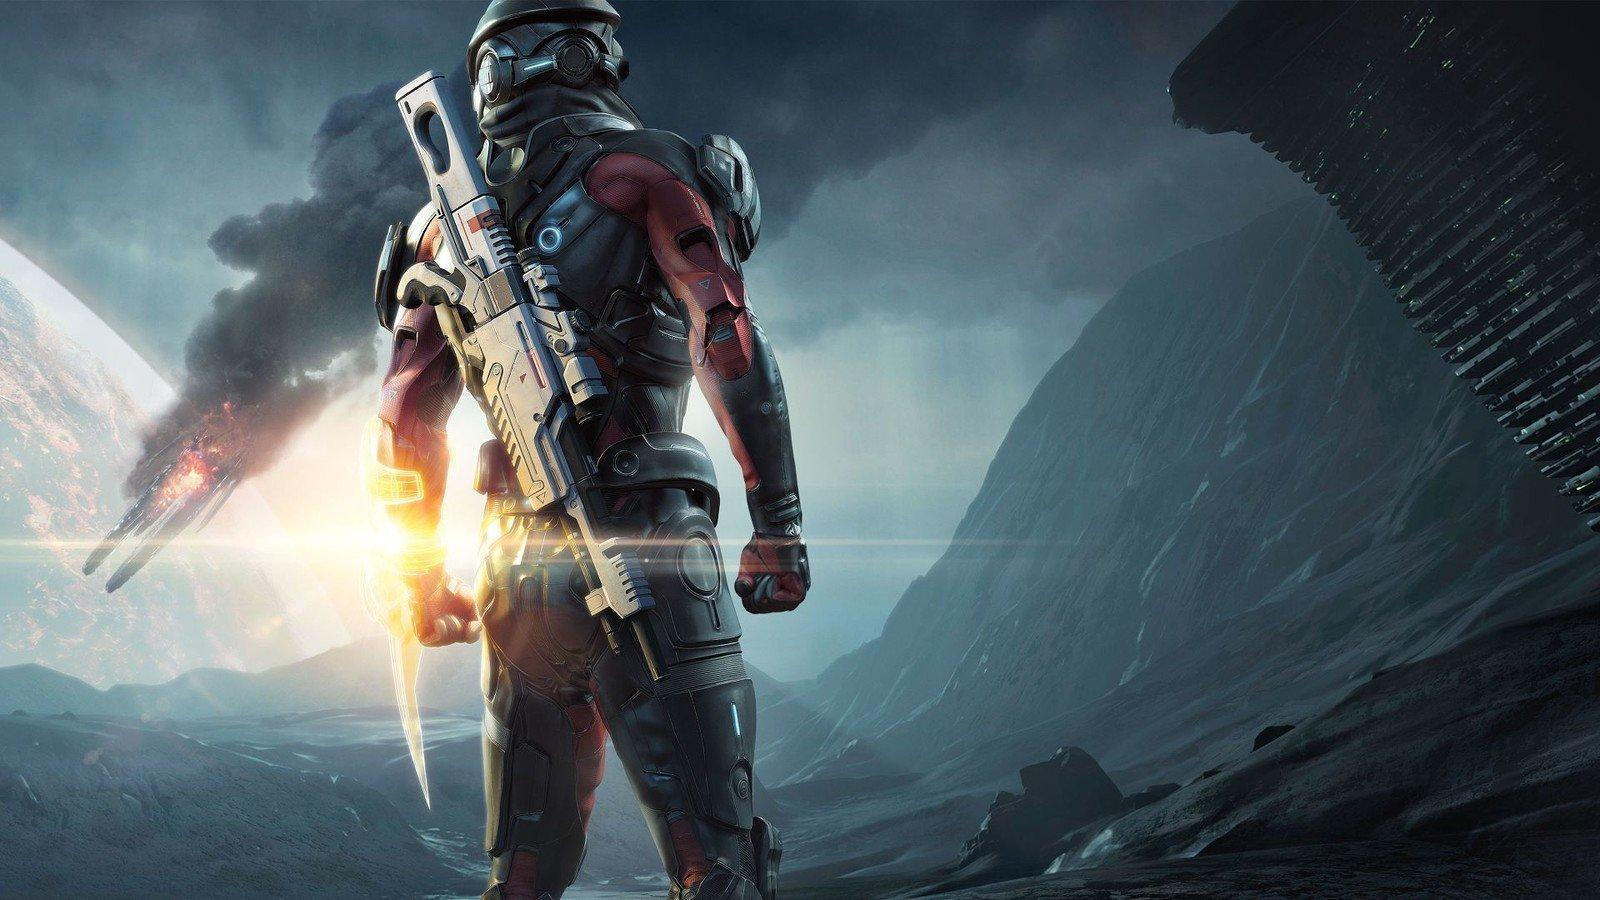 Dead Space Wallpapers For Phone For Android Apk Download